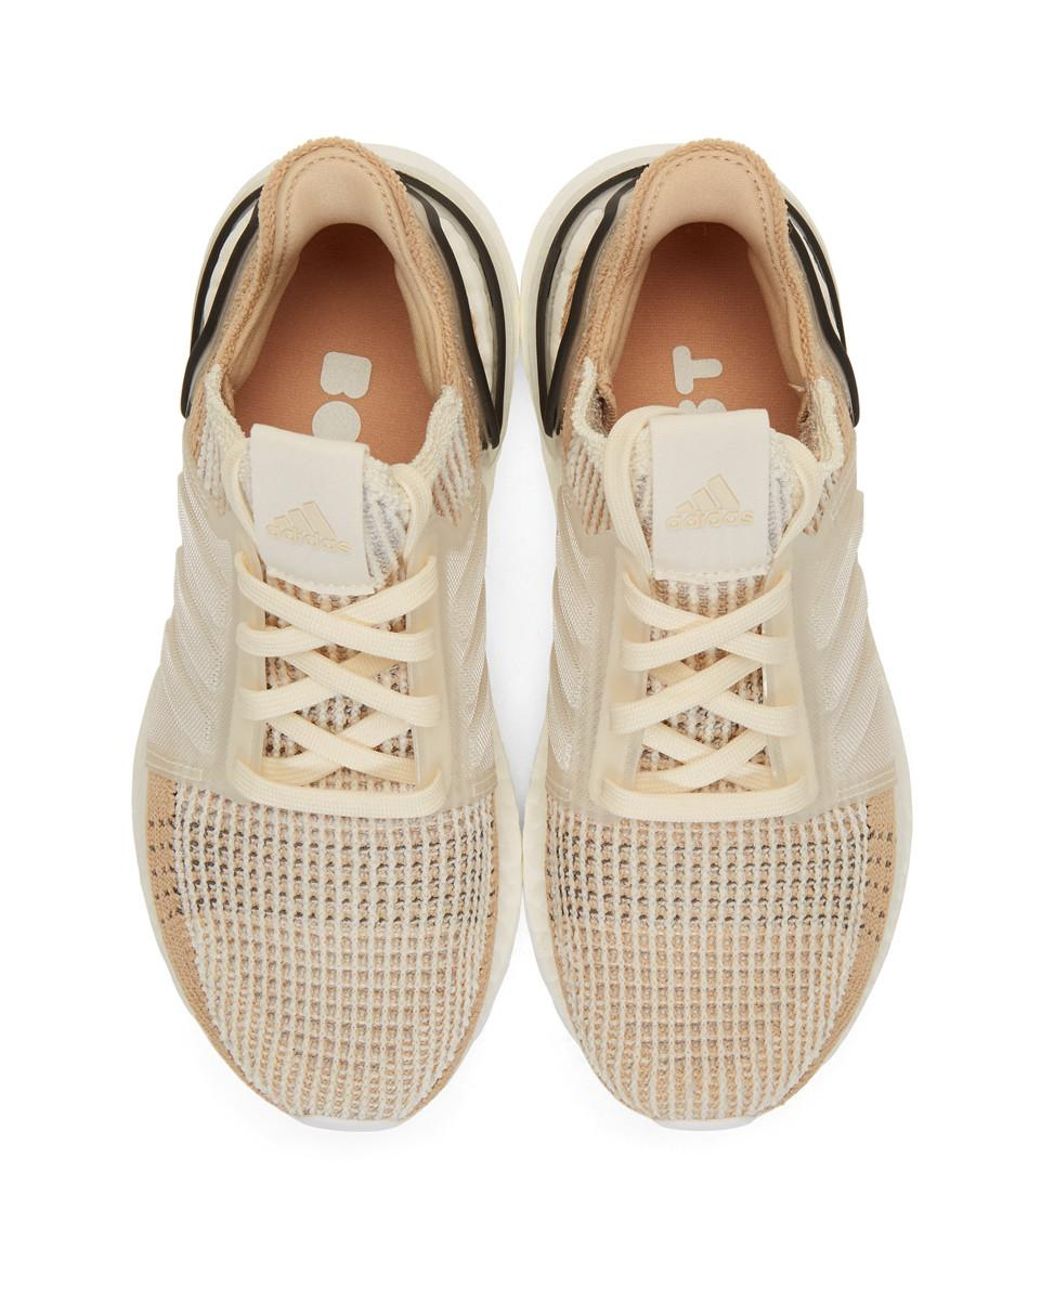 adidas Rubber Beige Ultraboost 19w Sneakers in Chalk White (Natural) | Lyst